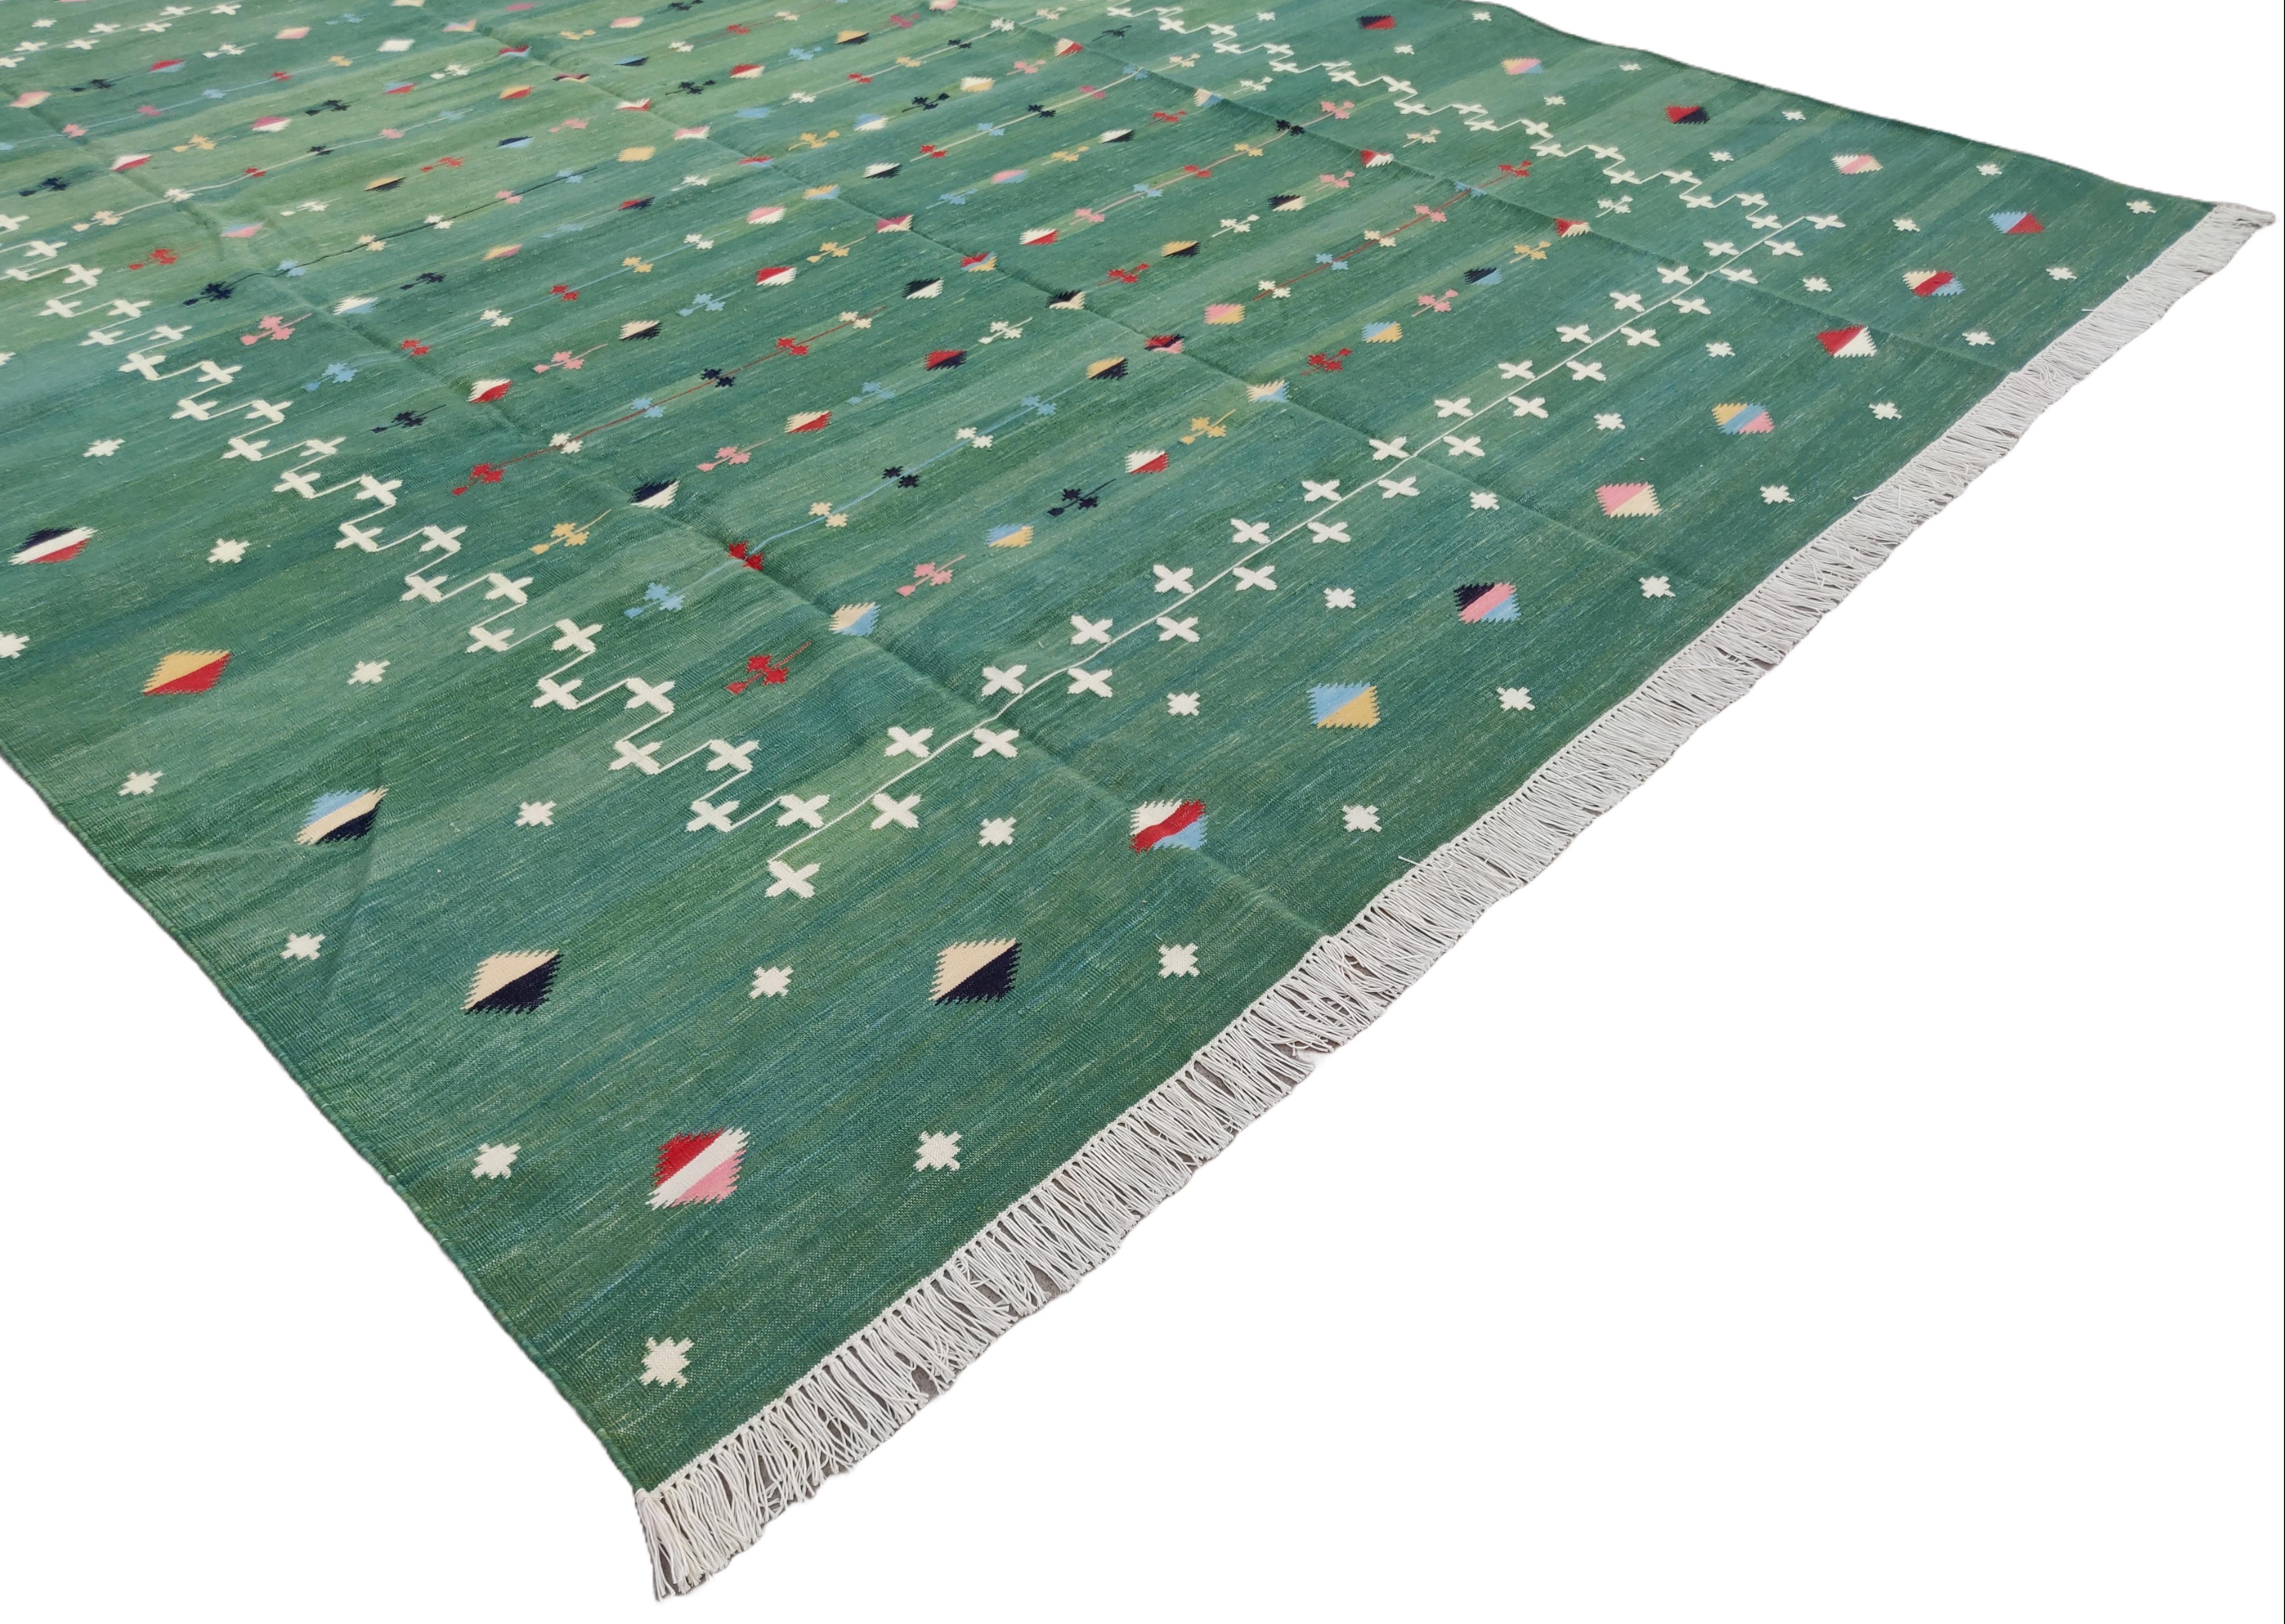 Cotton Vegetable Dyed Forest Green And White Shooting Star Rug-12'x15'
These special flat-weave dhurries are hand-woven with 15 ply 100% cotton yarn. Due to the special manufacturing techniques used to create our rugs, the size and color of each